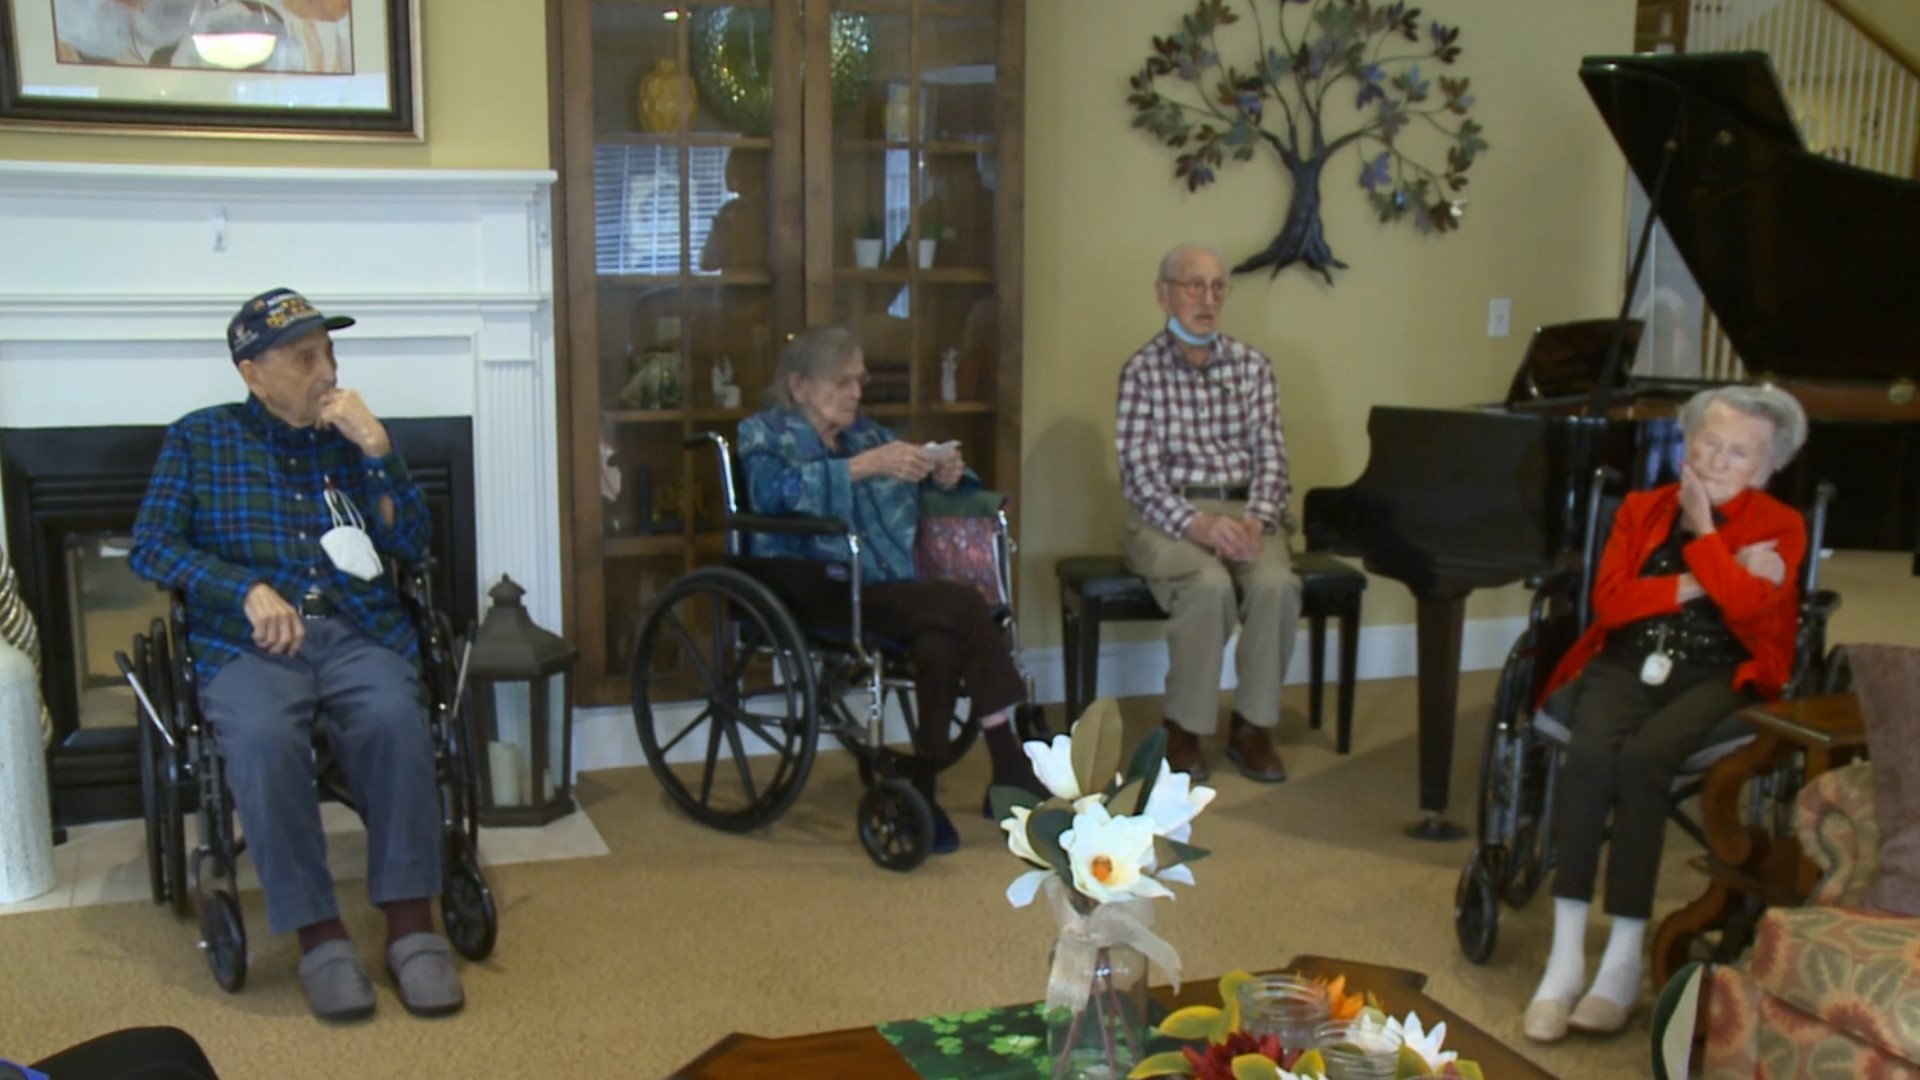 It's the first time the senior living home is celebrating four birthdays over 100.